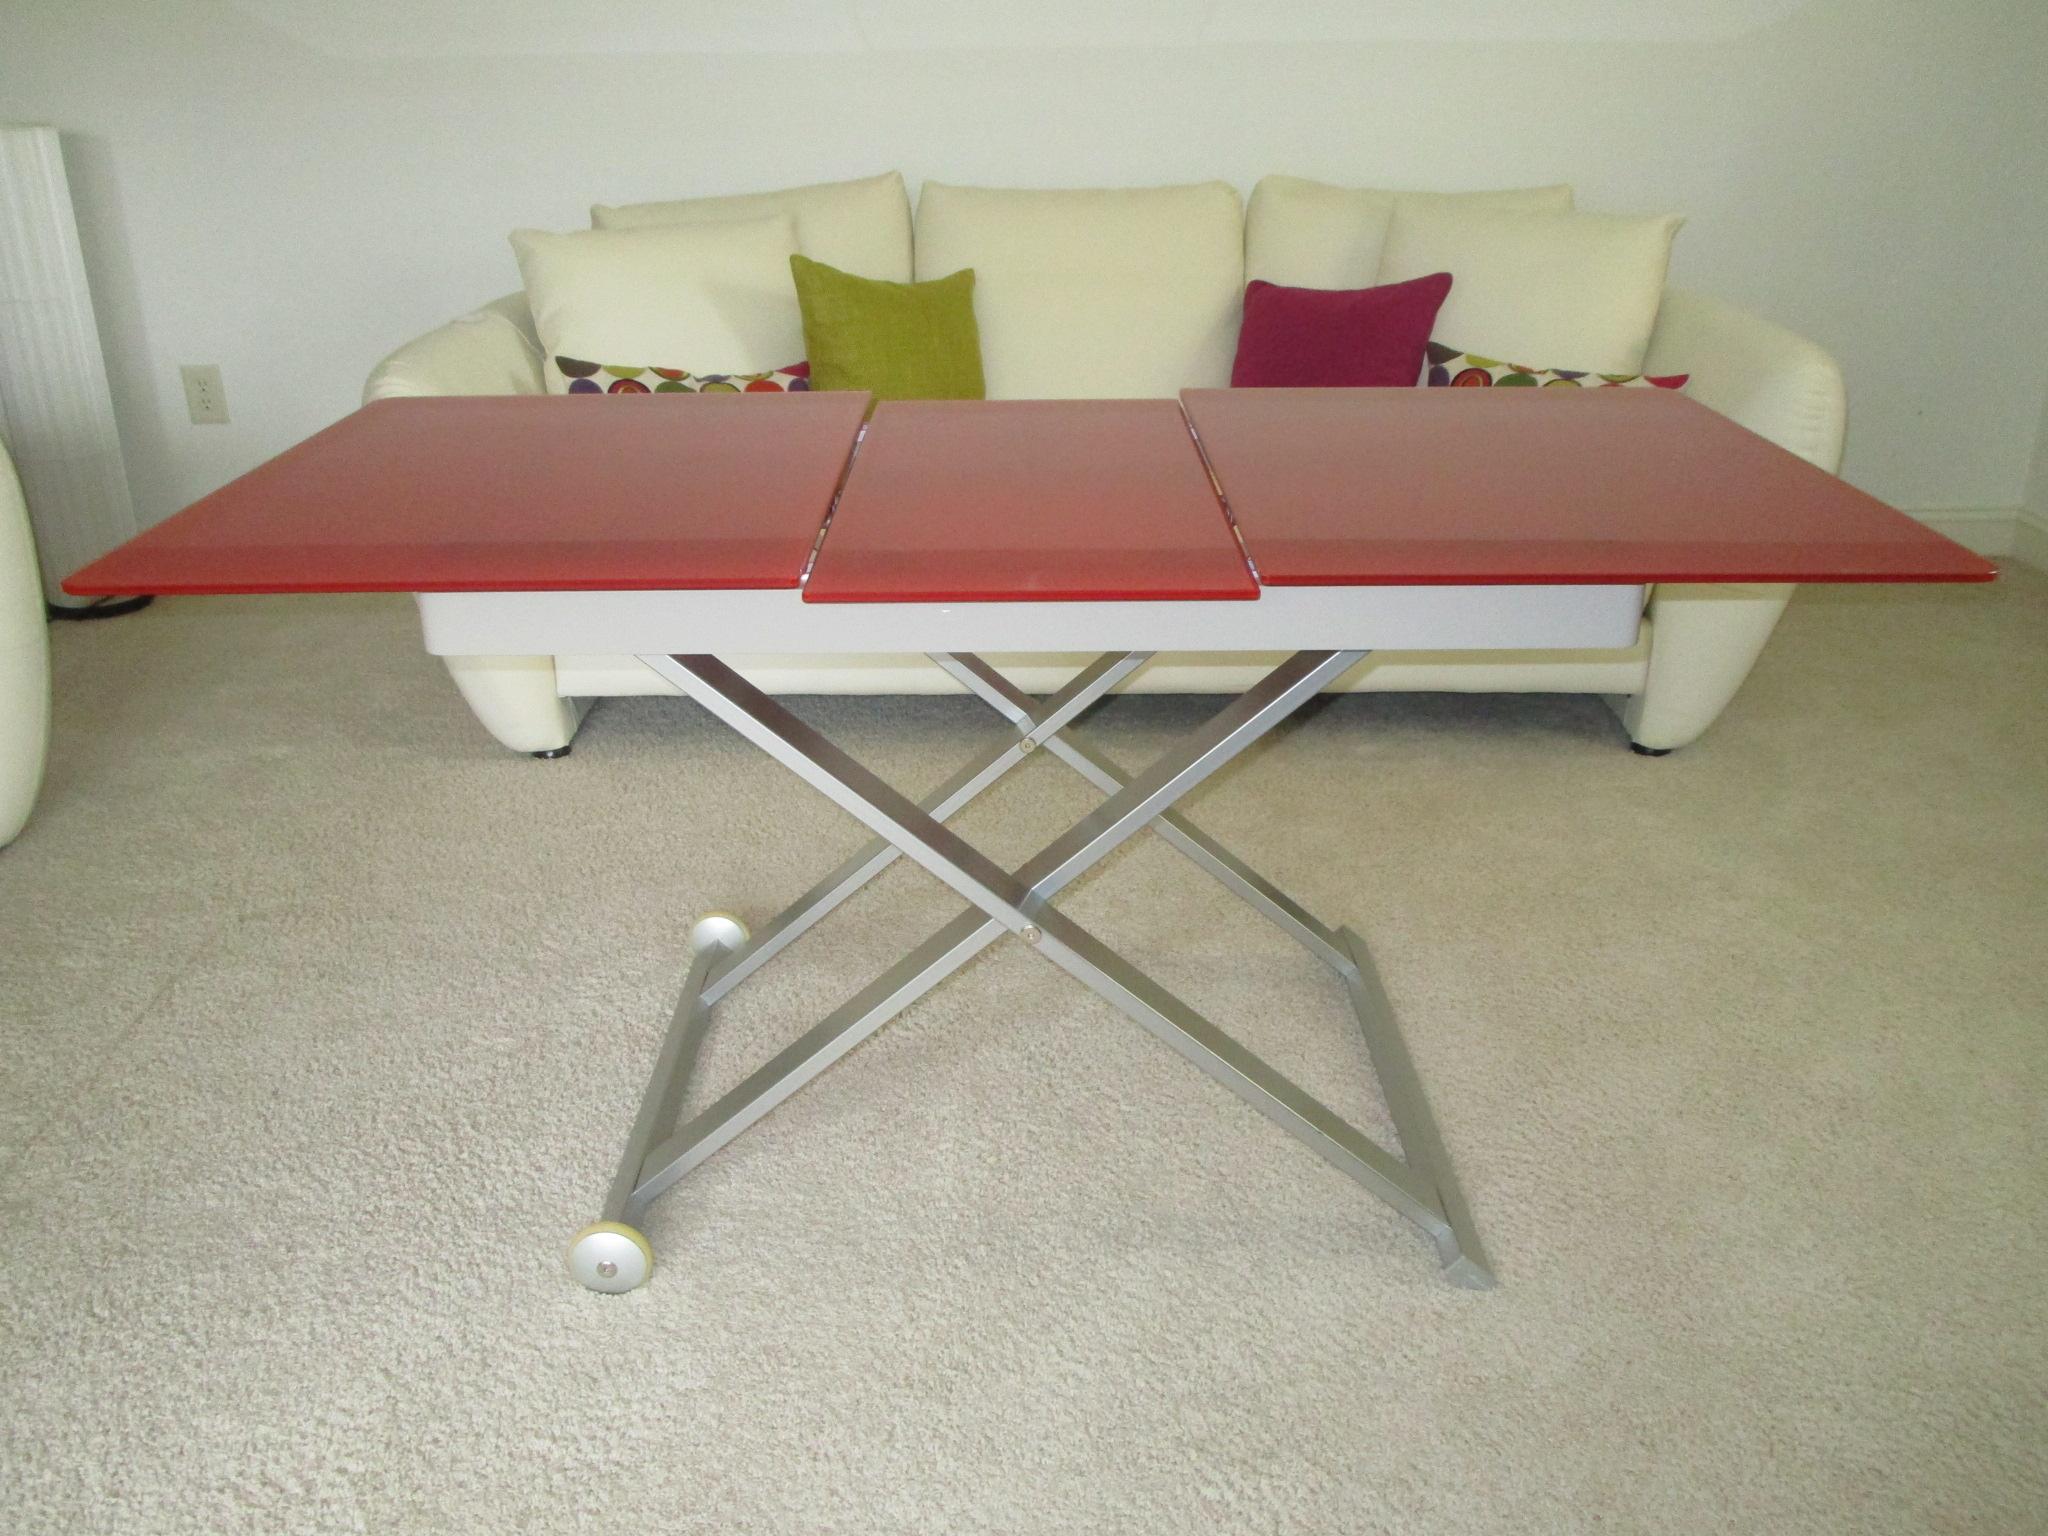 Awesome  "Calligaris" (Italian Designer) Table w/Red Tempered Glass & Stainless Base